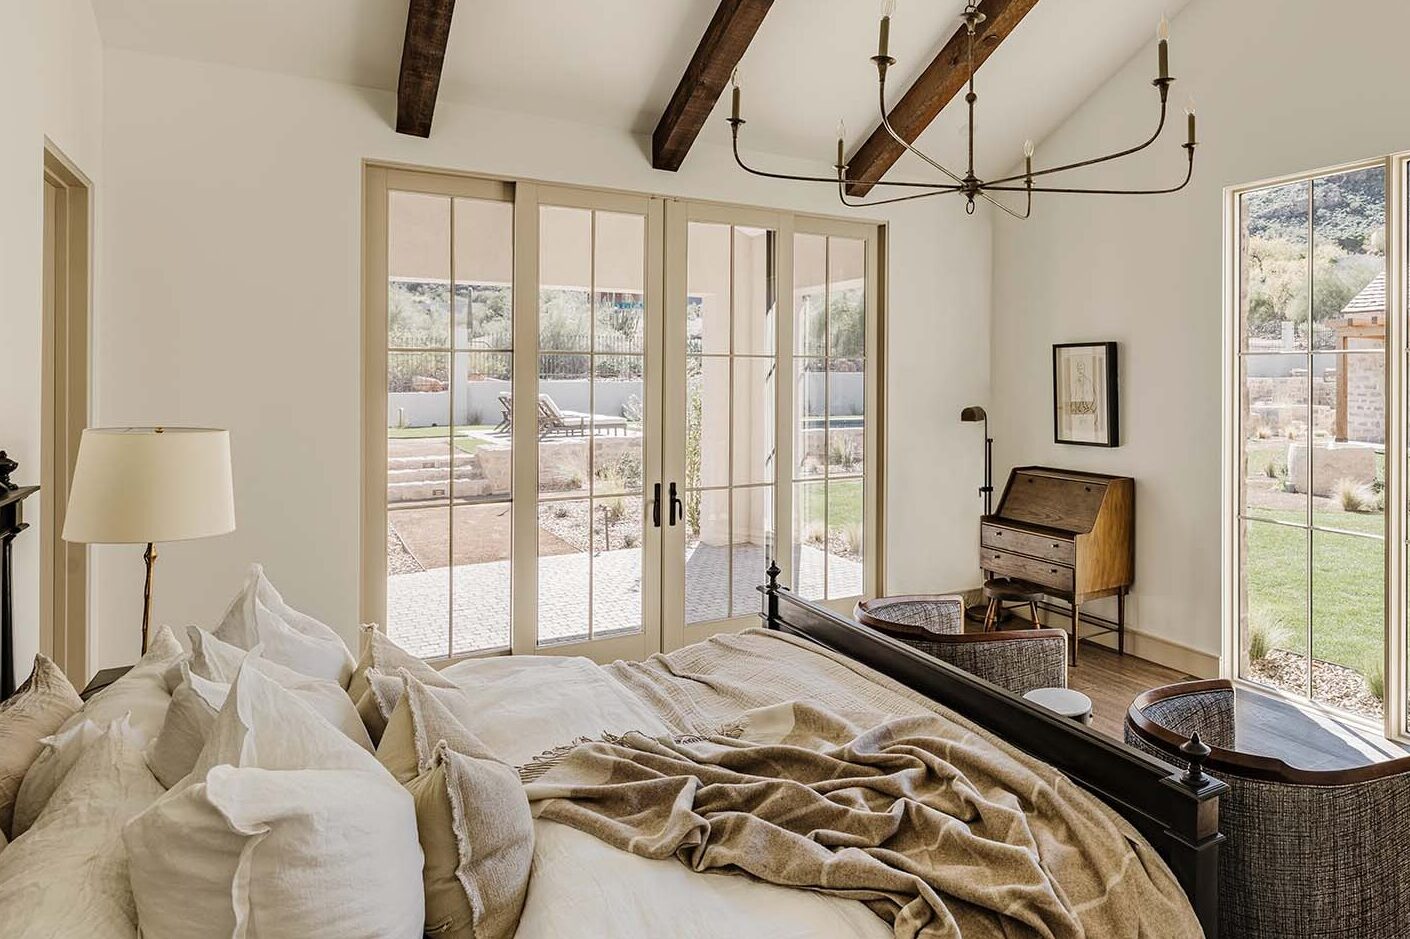 English Country by Modern Nest | English Country Primary Bedroom | Bedroom Decor | Luxury Bedroom |  Scottsdale, Arizona Home Build | Market by Modern Nest | Modern Nest | Scottsdale, AZ | Design, Build, Furnish